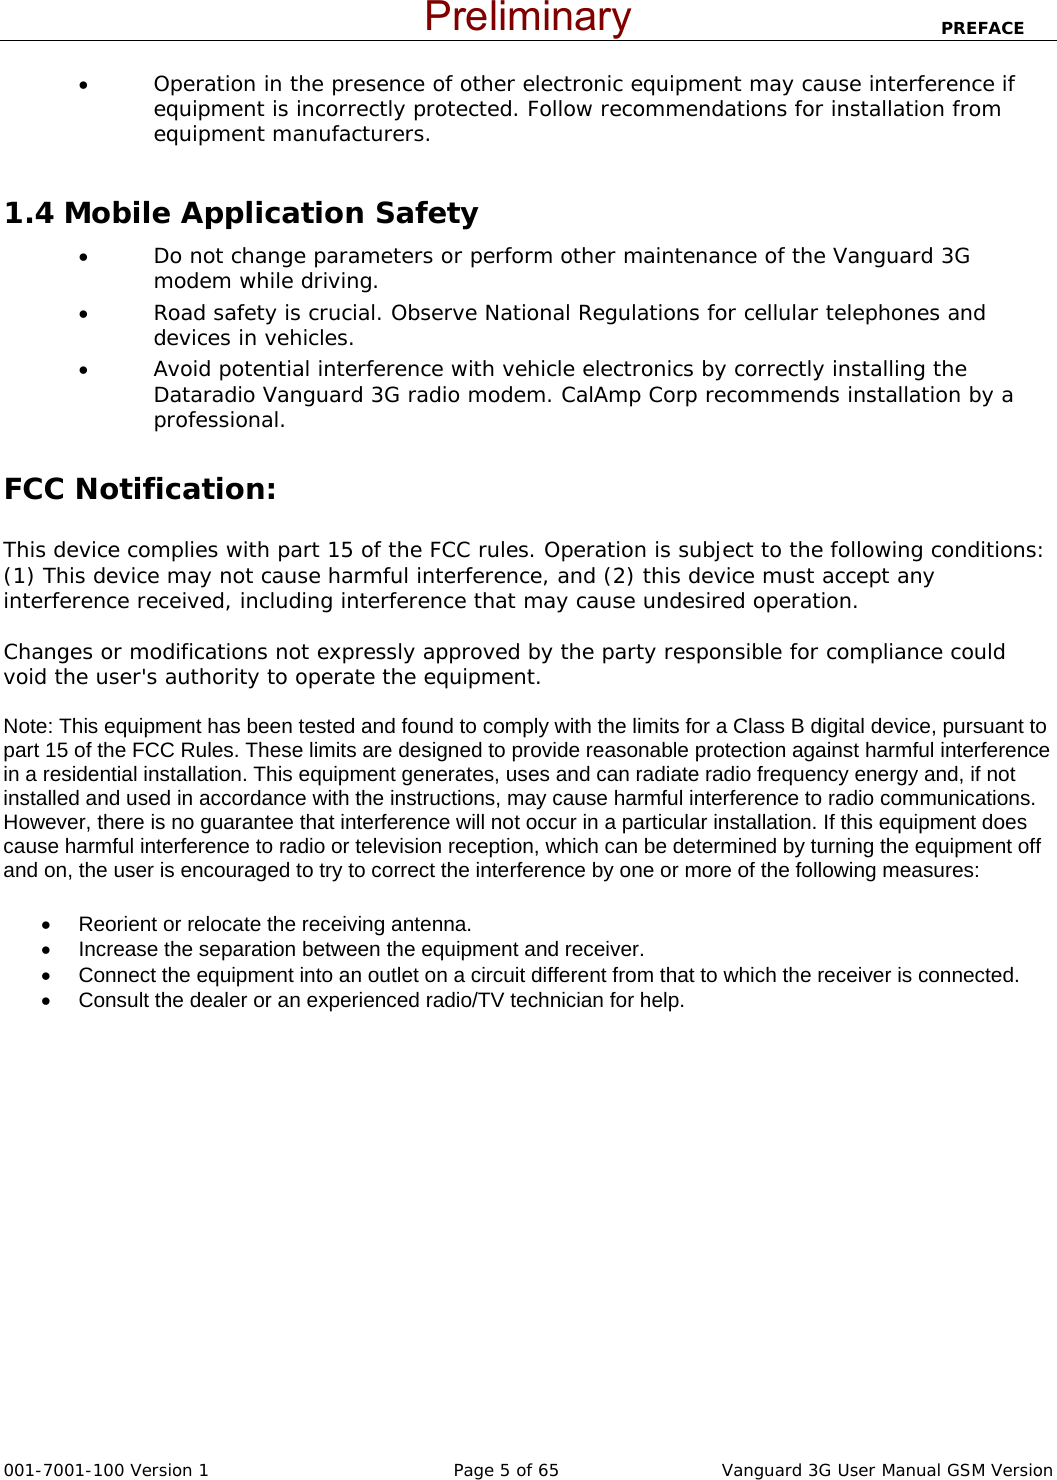                            PREFACE  001-7001-100 Version 1       Page 5 of 65       Vanguard 3G User Manual GSM Version • Operation in the presence of other electronic equipment may cause interference if equipment is incorrectly protected. Follow recommendations for installation from equipment manufacturers.  1.4 Mobile Application Safety • Do not change parameters or perform other maintenance of the Vanguard 3G modem while driving. • Road safety is crucial. Observe National Regulations for cellular telephones and devices in vehicles. • Avoid potential interference with vehicle electronics by correctly installing the Dataradio Vanguard 3G radio modem. CalAmp Corp recommends installation by a professional.  FCC Notification:  This device complies with part 15 of the FCC rules. Operation is subject to the following conditions: (1) This device may not cause harmful interference, and (2) this device must accept any interference received, including interference that may cause undesired operation.  Changes or modifications not expressly approved by the party responsible for compliance could void the user&apos;s authority to operate the equipment.  Note: This equipment has been tested and found to comply with the limits for a Class B digital device, pursuant to part 15 of the FCC Rules. These limits are designed to provide reasonable protection against harmful interference in a residential installation. This equipment generates, uses and can radiate radio frequency energy and, if not installed and used in accordance with the instructions, may cause harmful interference to radio communications. However, there is no guarantee that interference will not occur in a particular installation. If this equipment does cause harmful interference to radio or television reception, which can be determined by turning the equipment off and on, the user is encouraged to try to correct the interference by one or more of the following measures: •  Reorient or relocate the receiving antenna. •  Increase the separation between the equipment and receiver. •  Connect the equipment into an outlet on a circuit different from that to which the receiver is connected. •  Consult the dealer or an experienced radio/TV technician for help.    Preliminary